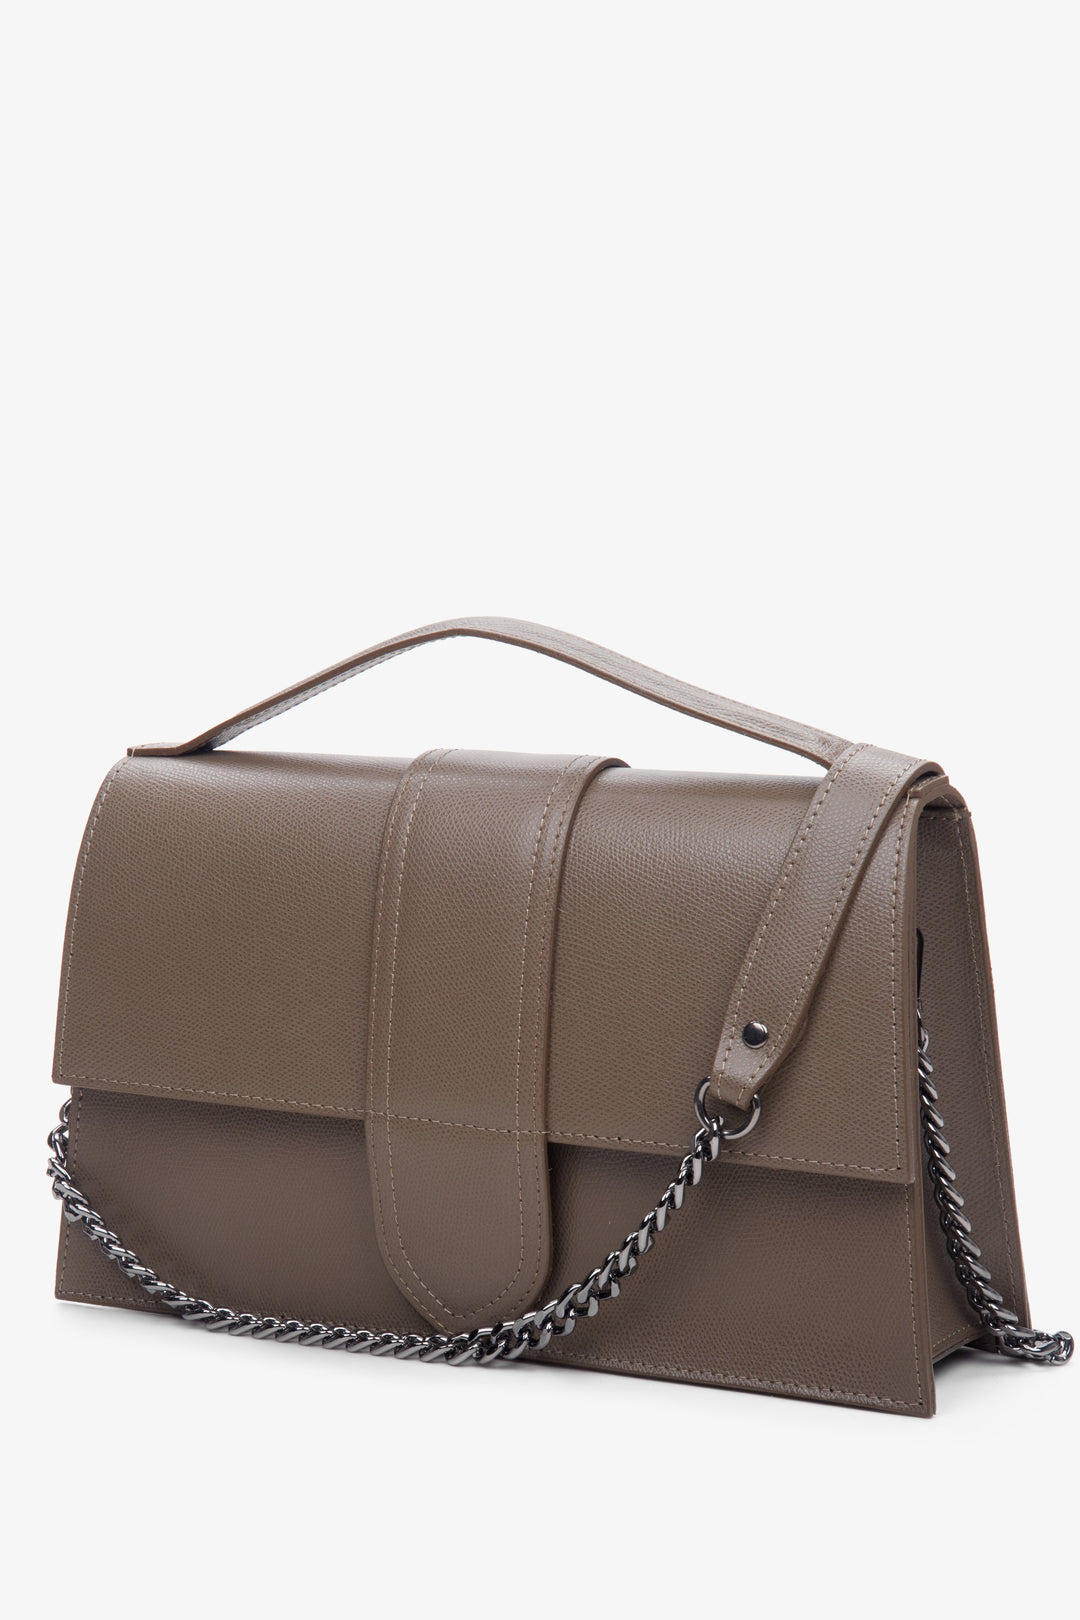 Women's small brown leather handbag by Estro - close-up on the front of the model.